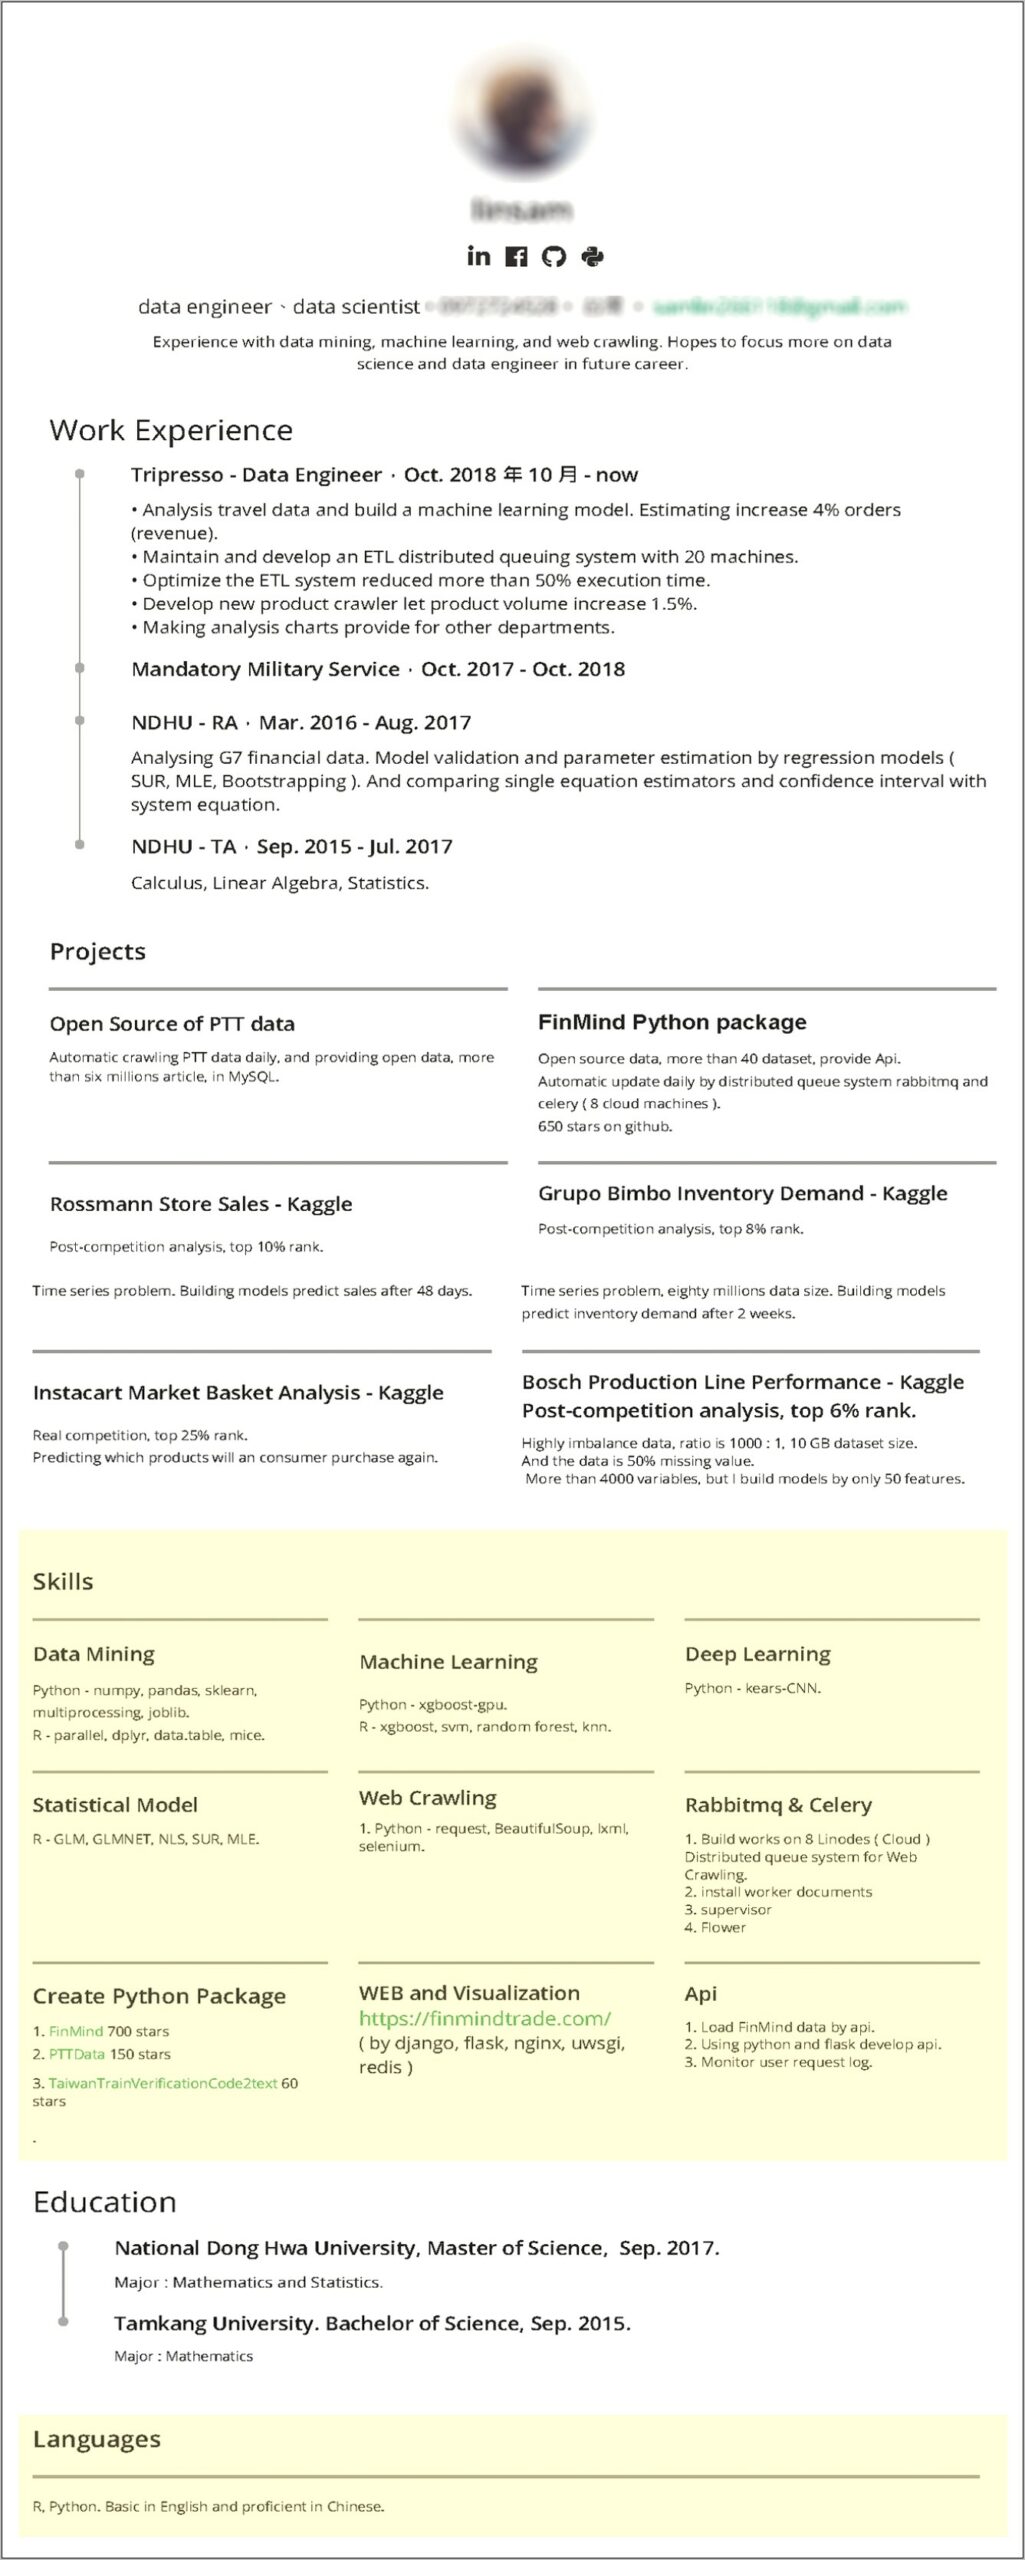 Python Comes Under Which Skill In Resume